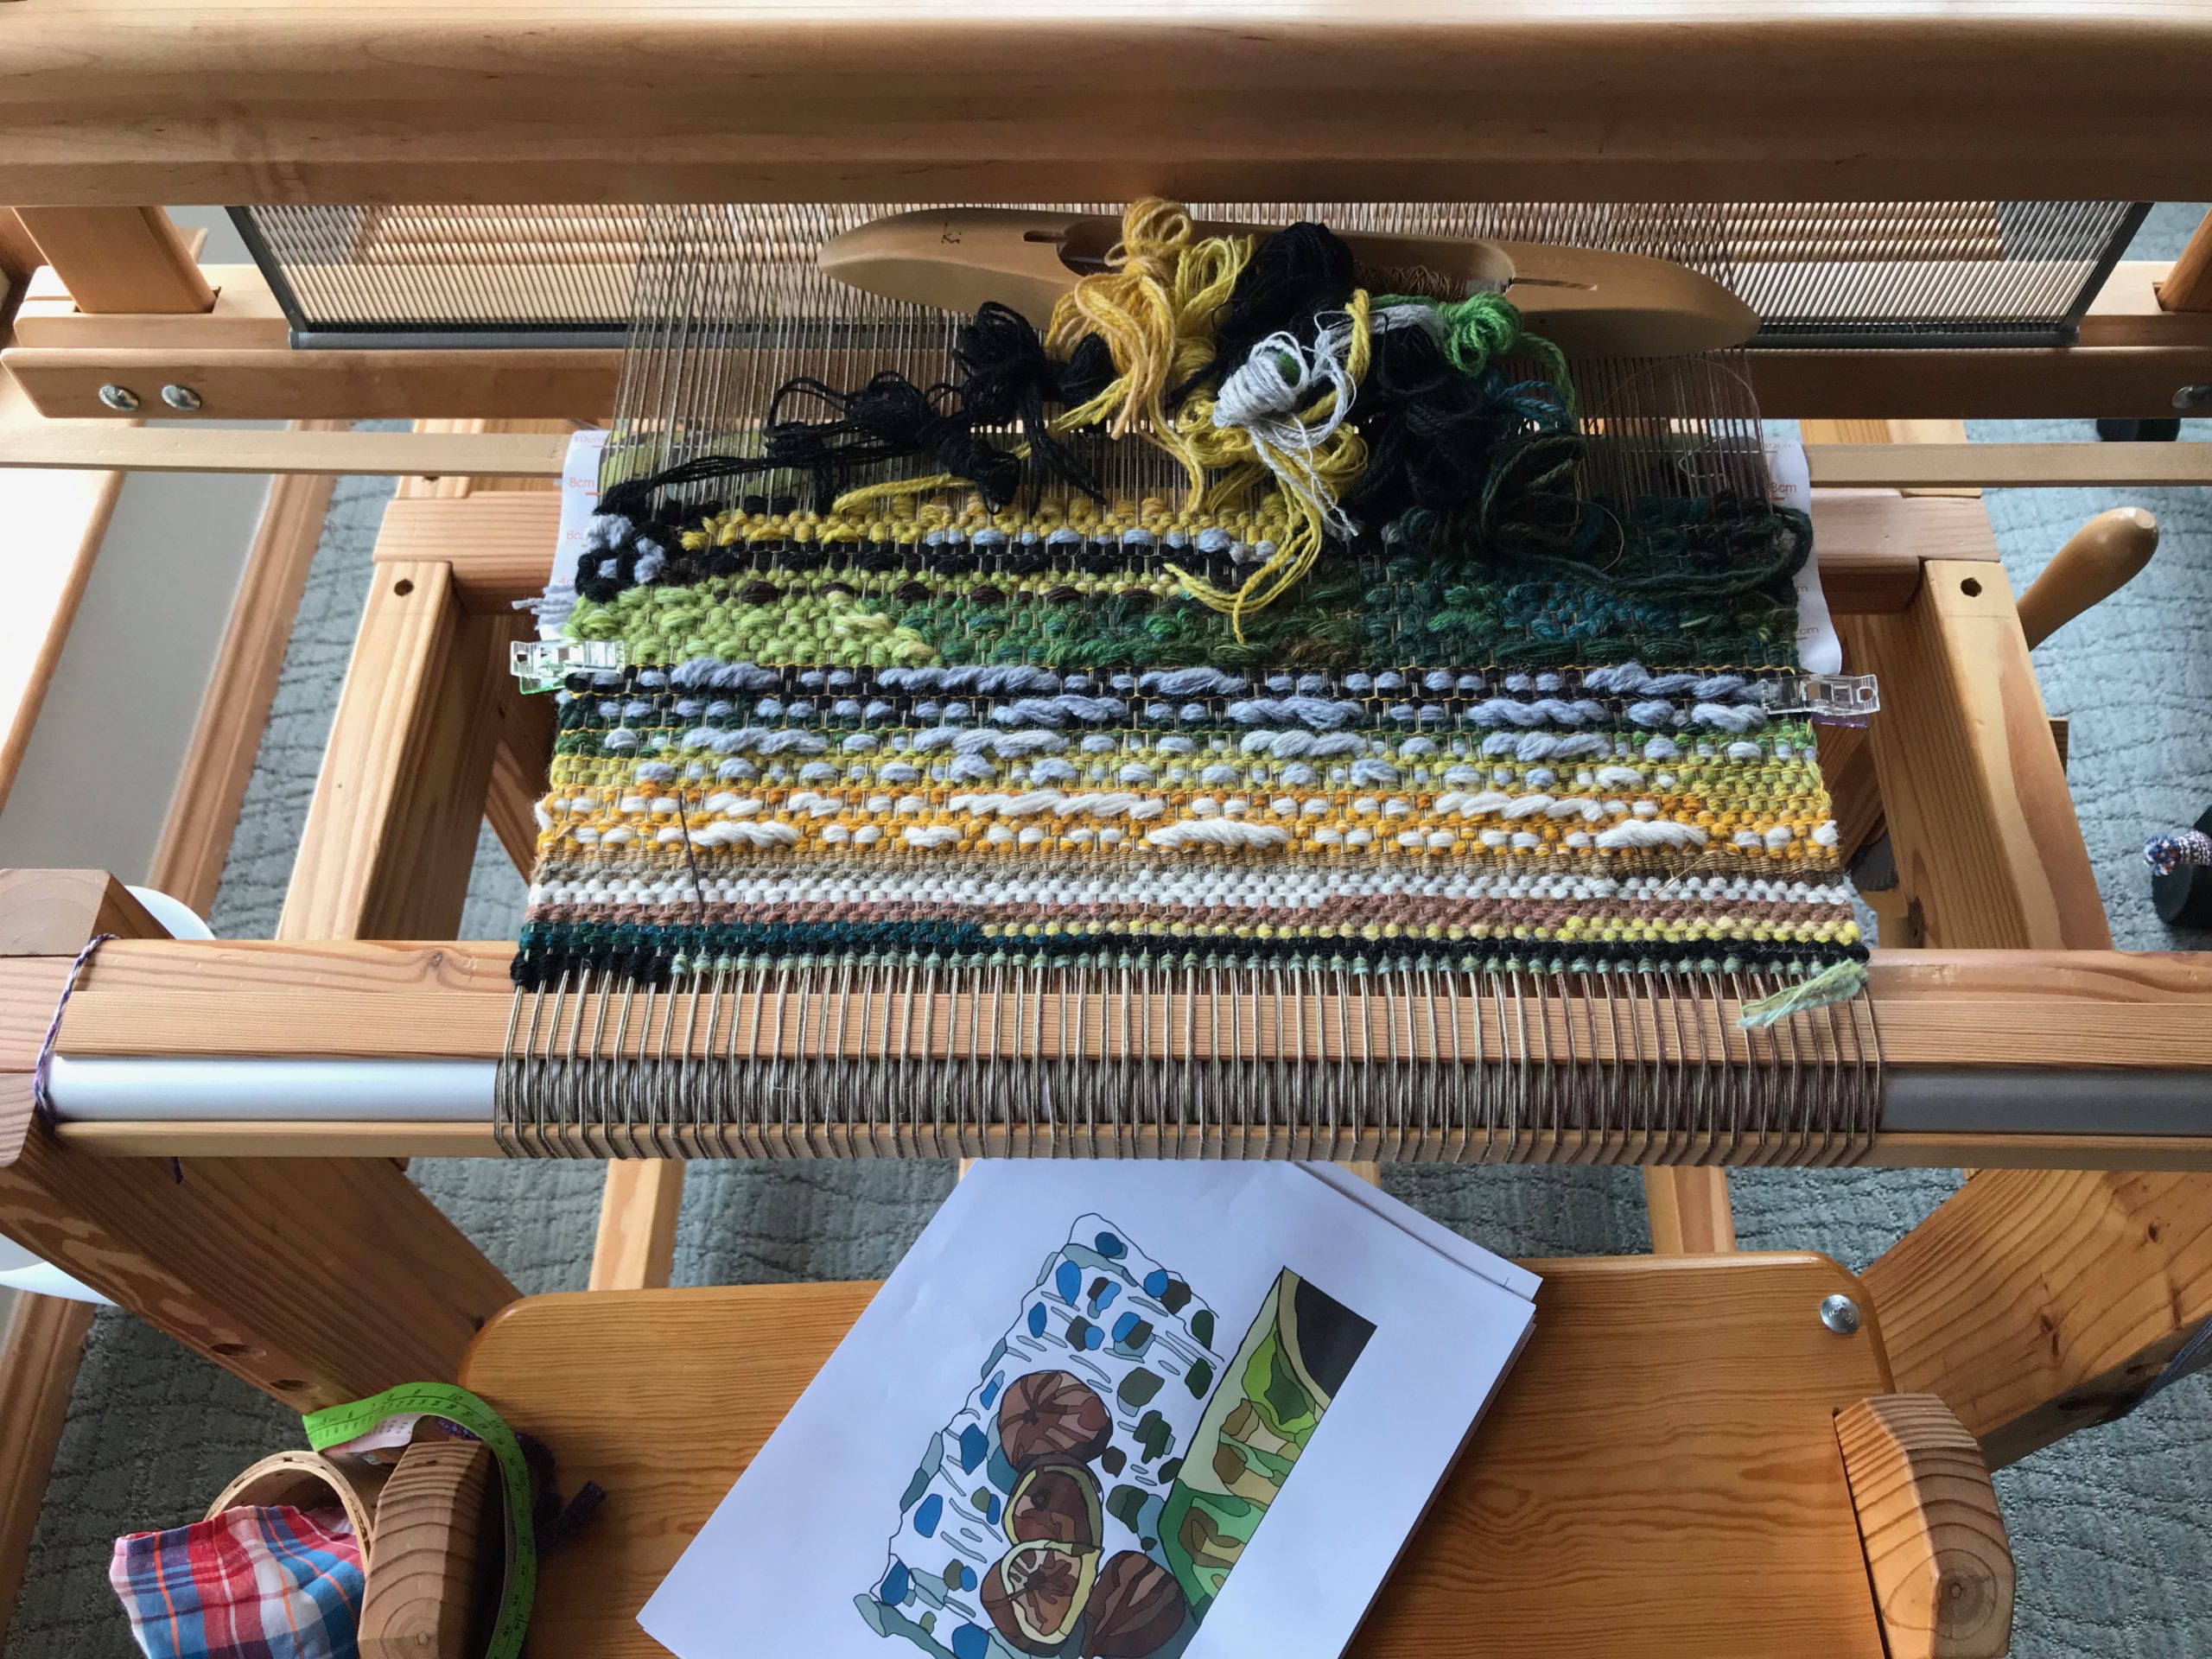 Work for Idle Hands: DIY Pin Loom